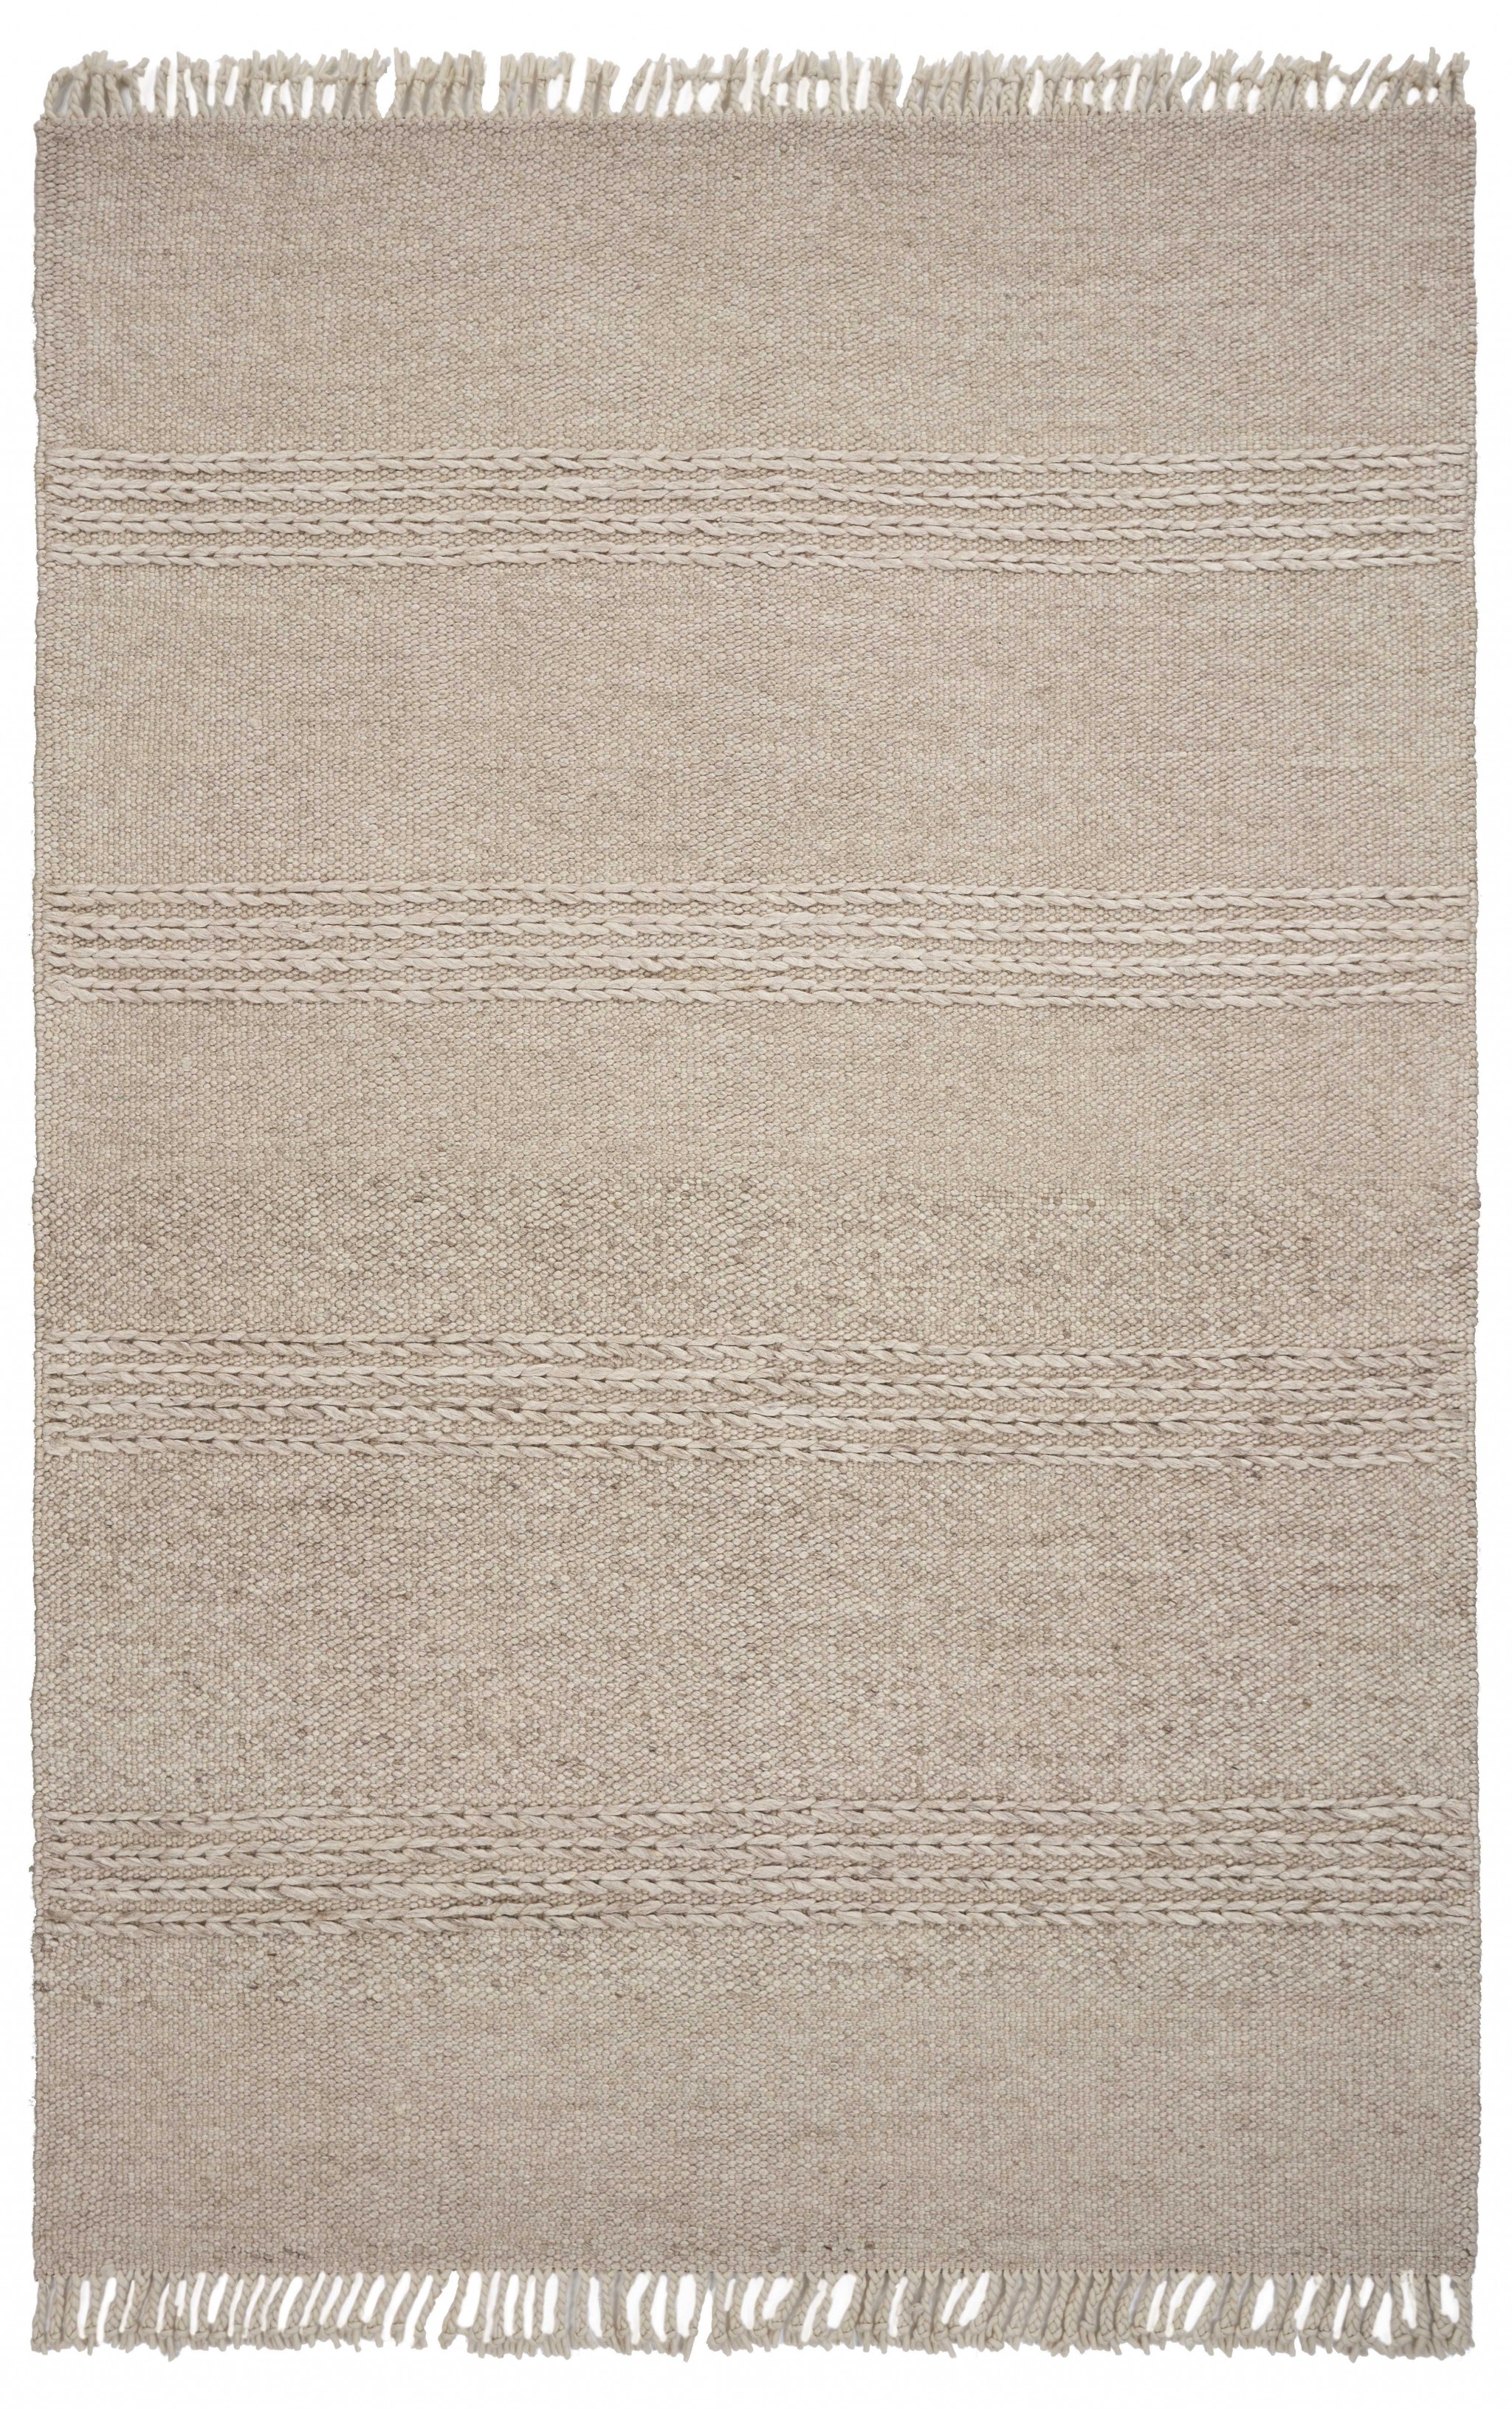 5' X 8' Natural Plain Wool Indoor Area Rug With Fringe-353053-1